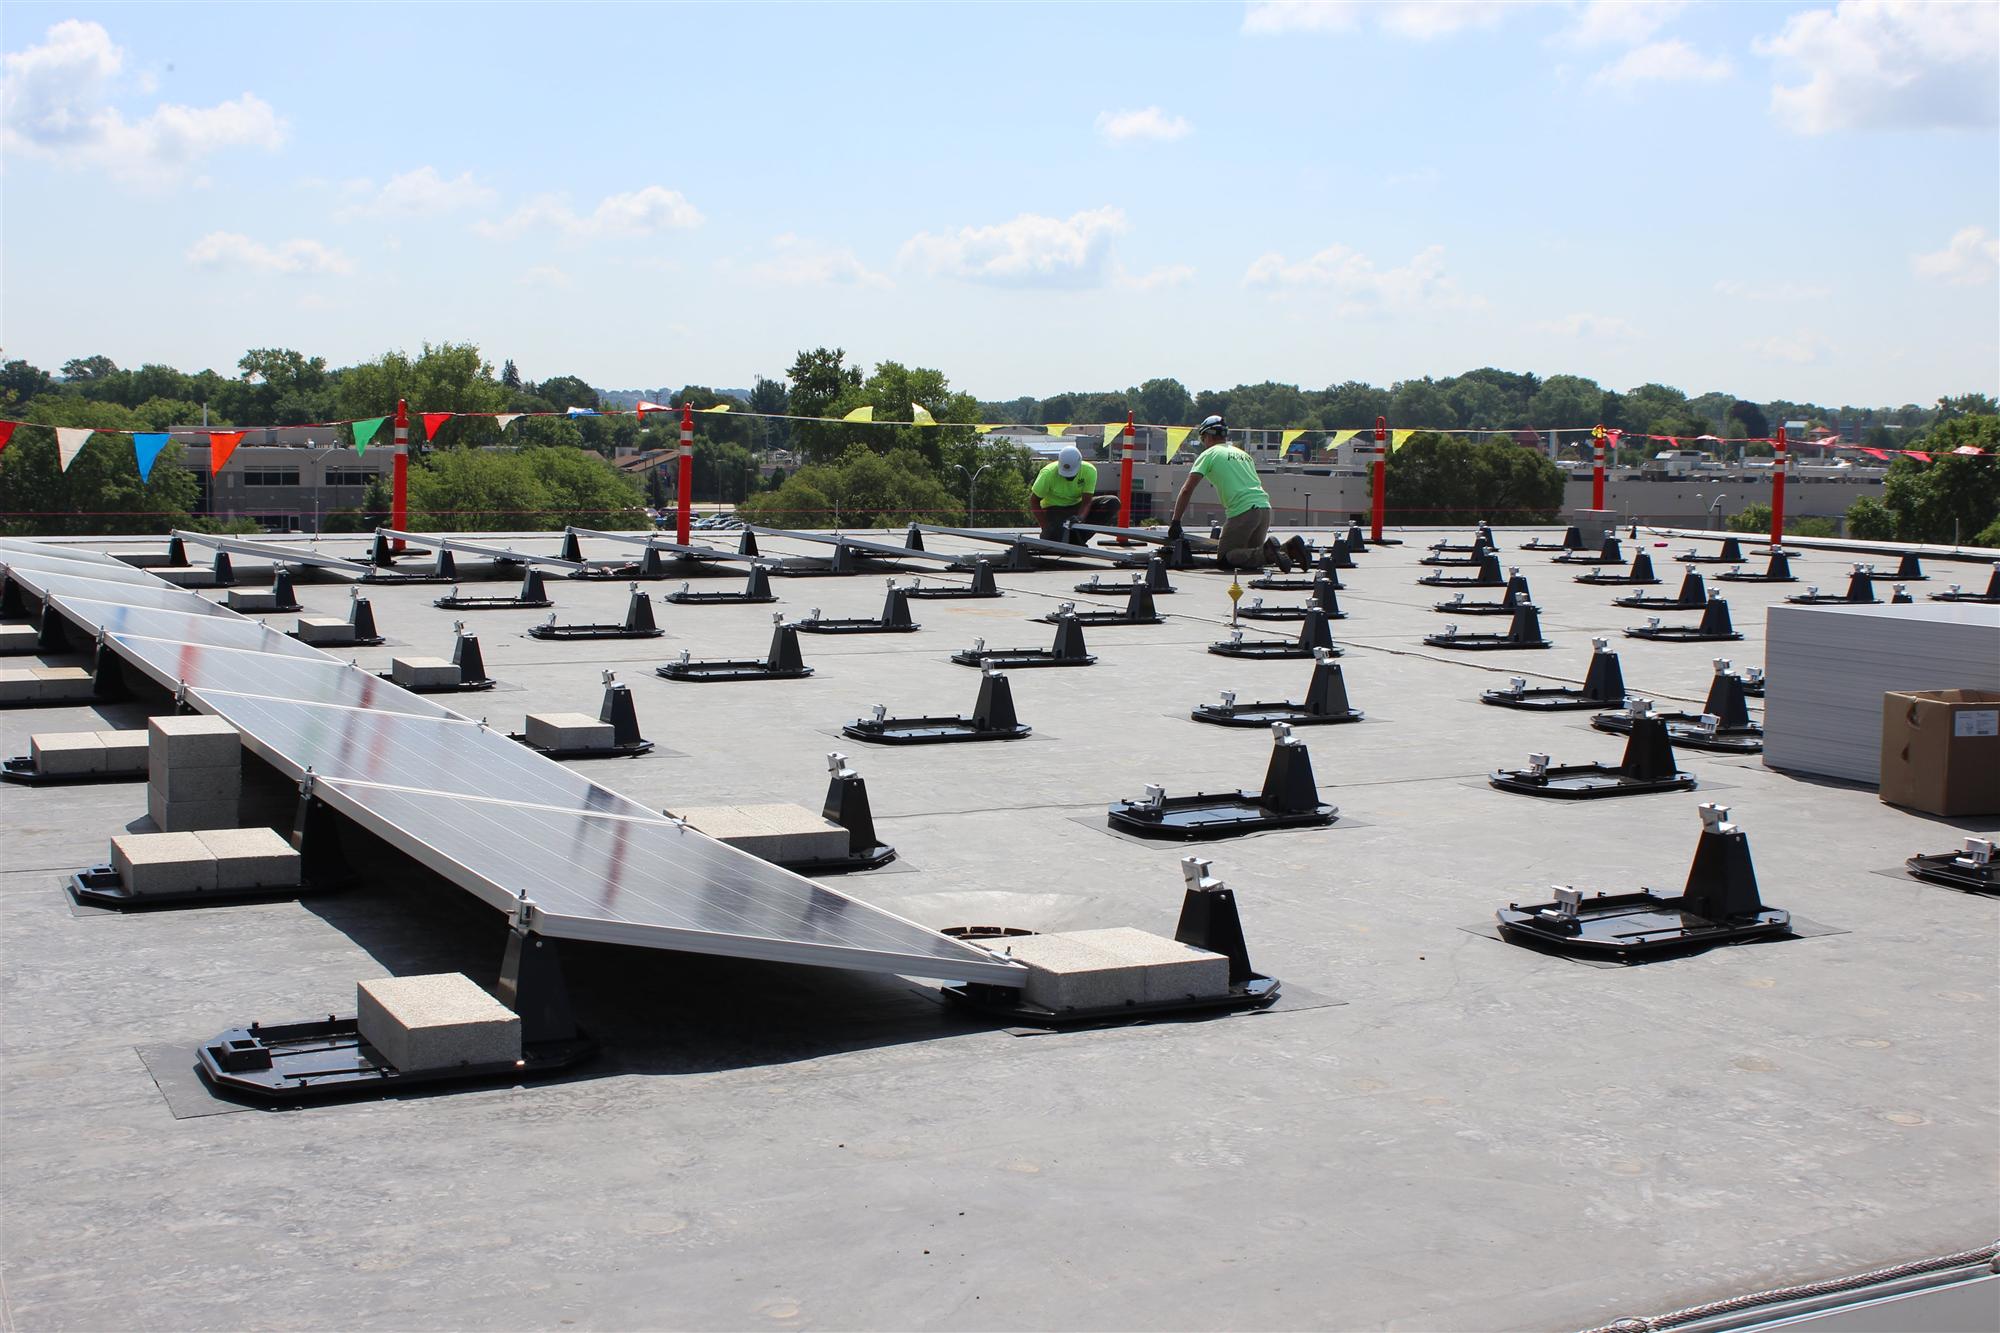  Largest rooftop solar in Madison, WI